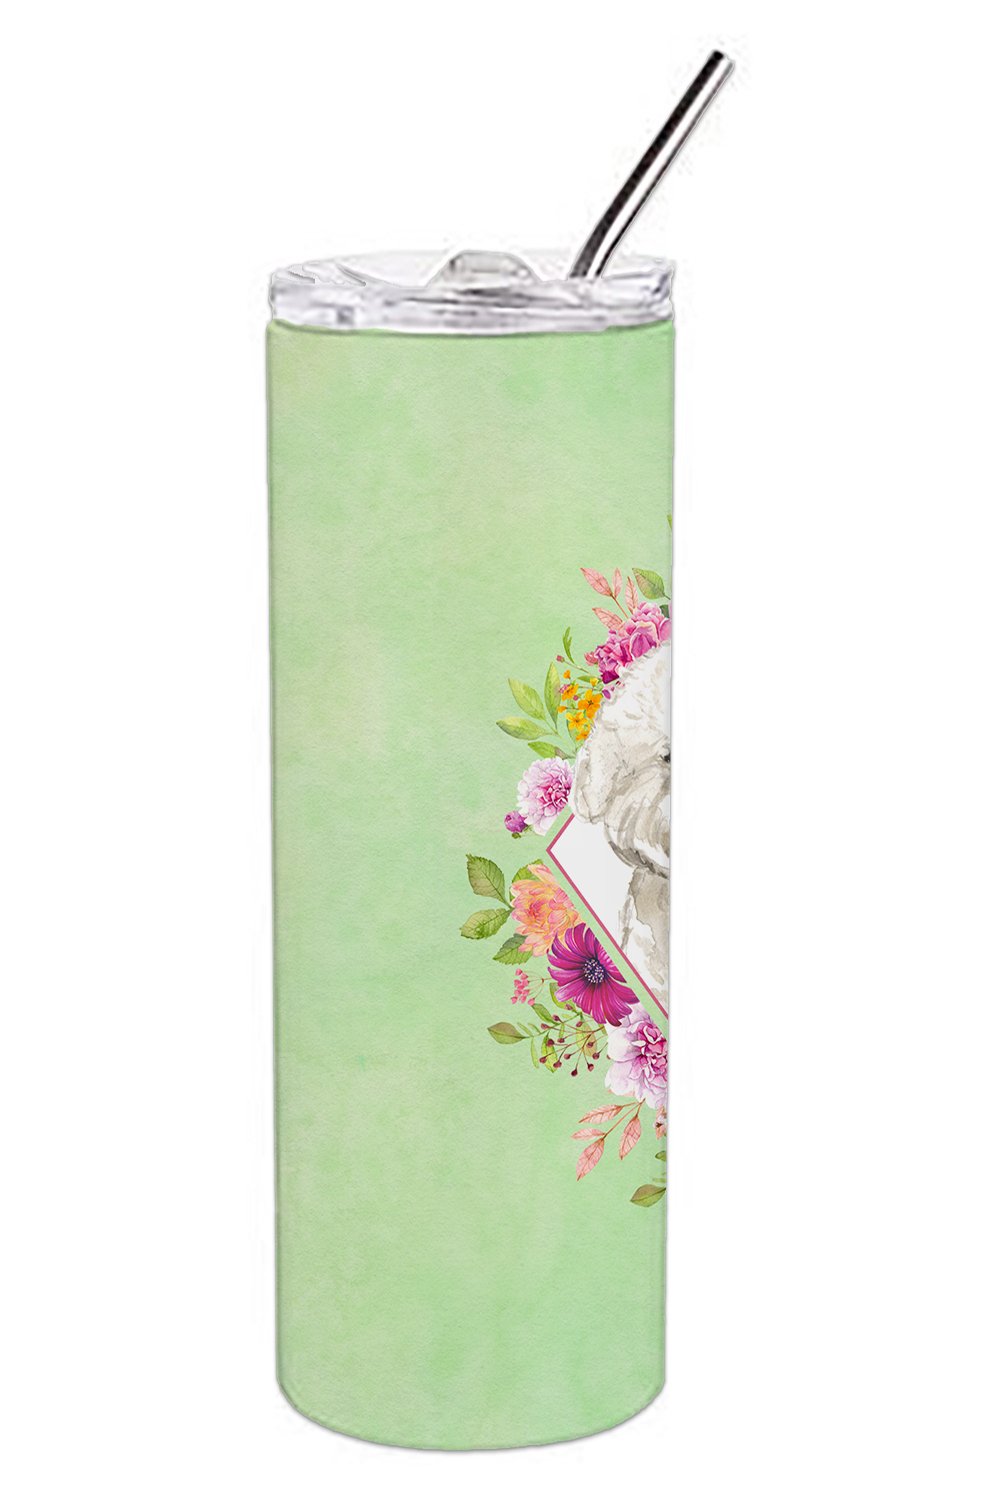 Bichon Frise Green Flowers Double Walled Stainless Steel 20 oz Skinny Tumbler CK4423TBL20 by Caroline's Treasures